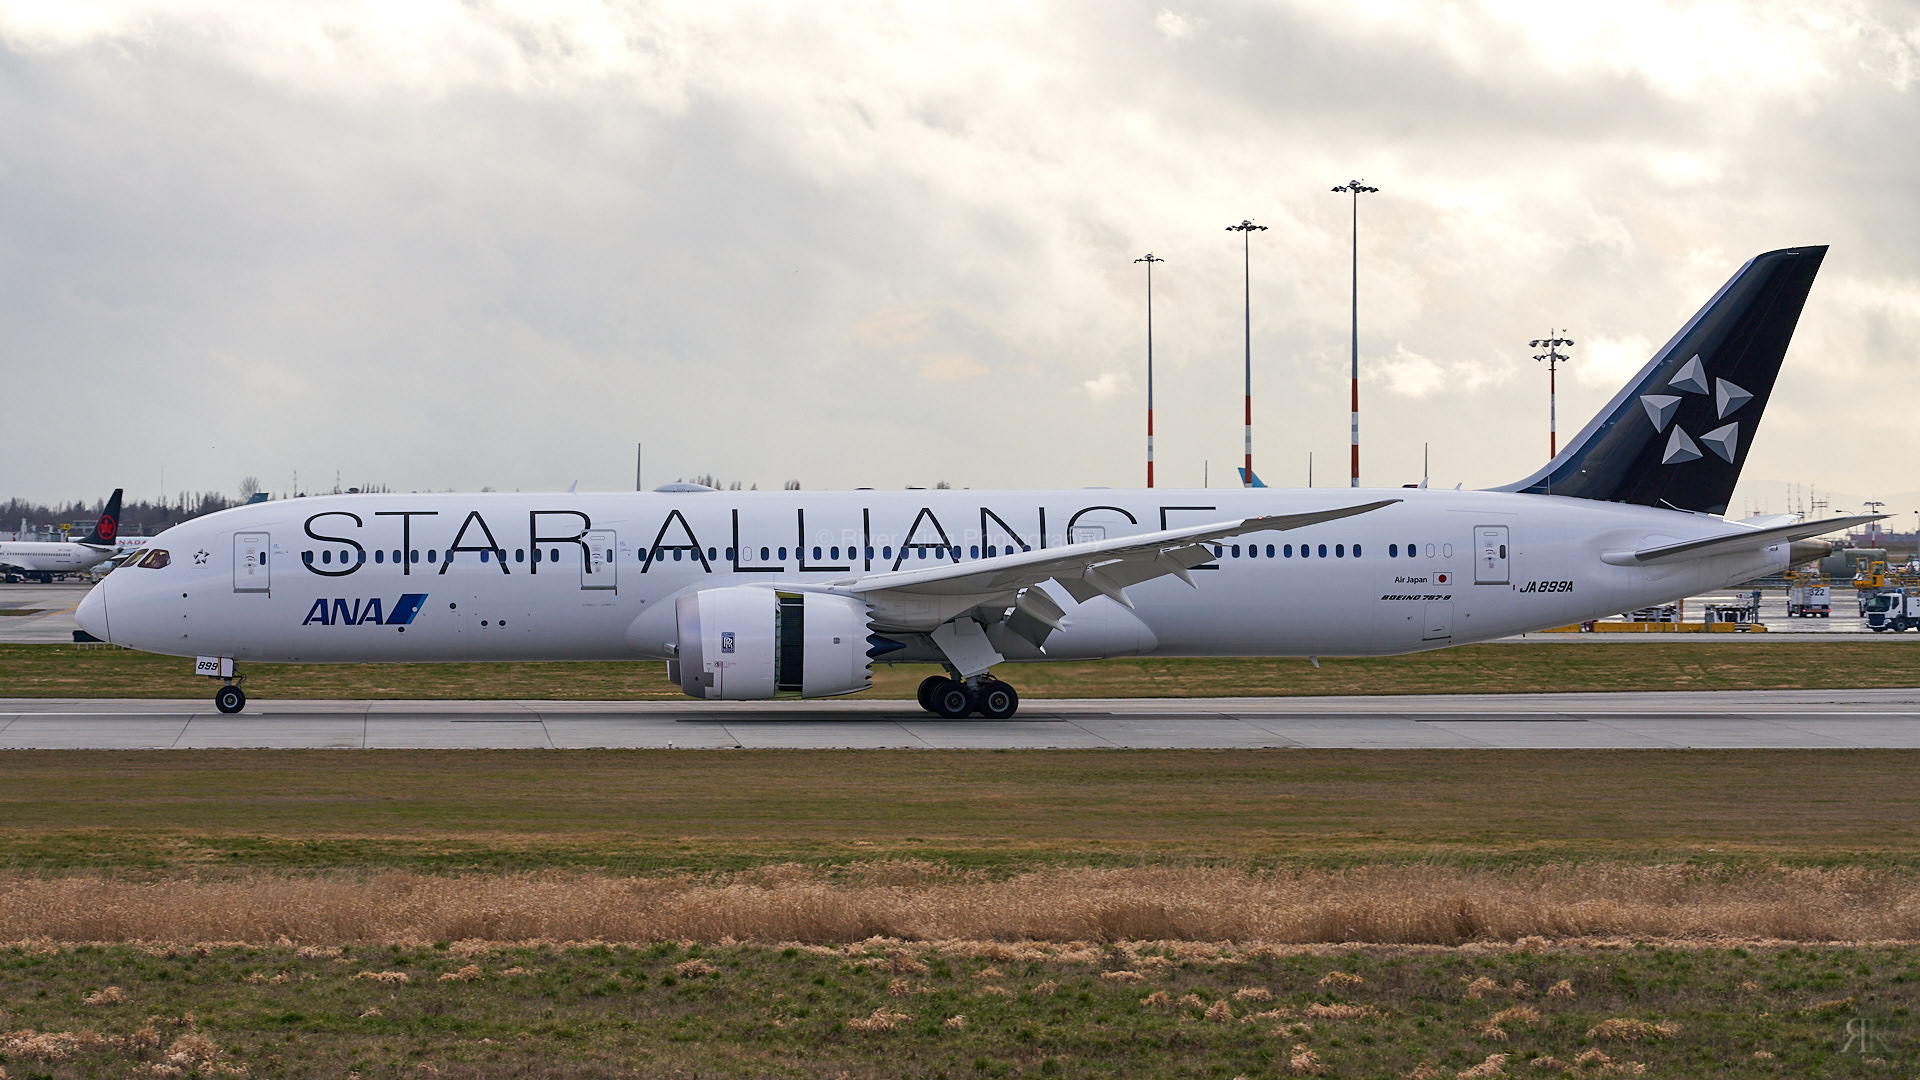 ANA: Boeing 787-9 With "Star Alliance" Livery | 02/03/2019